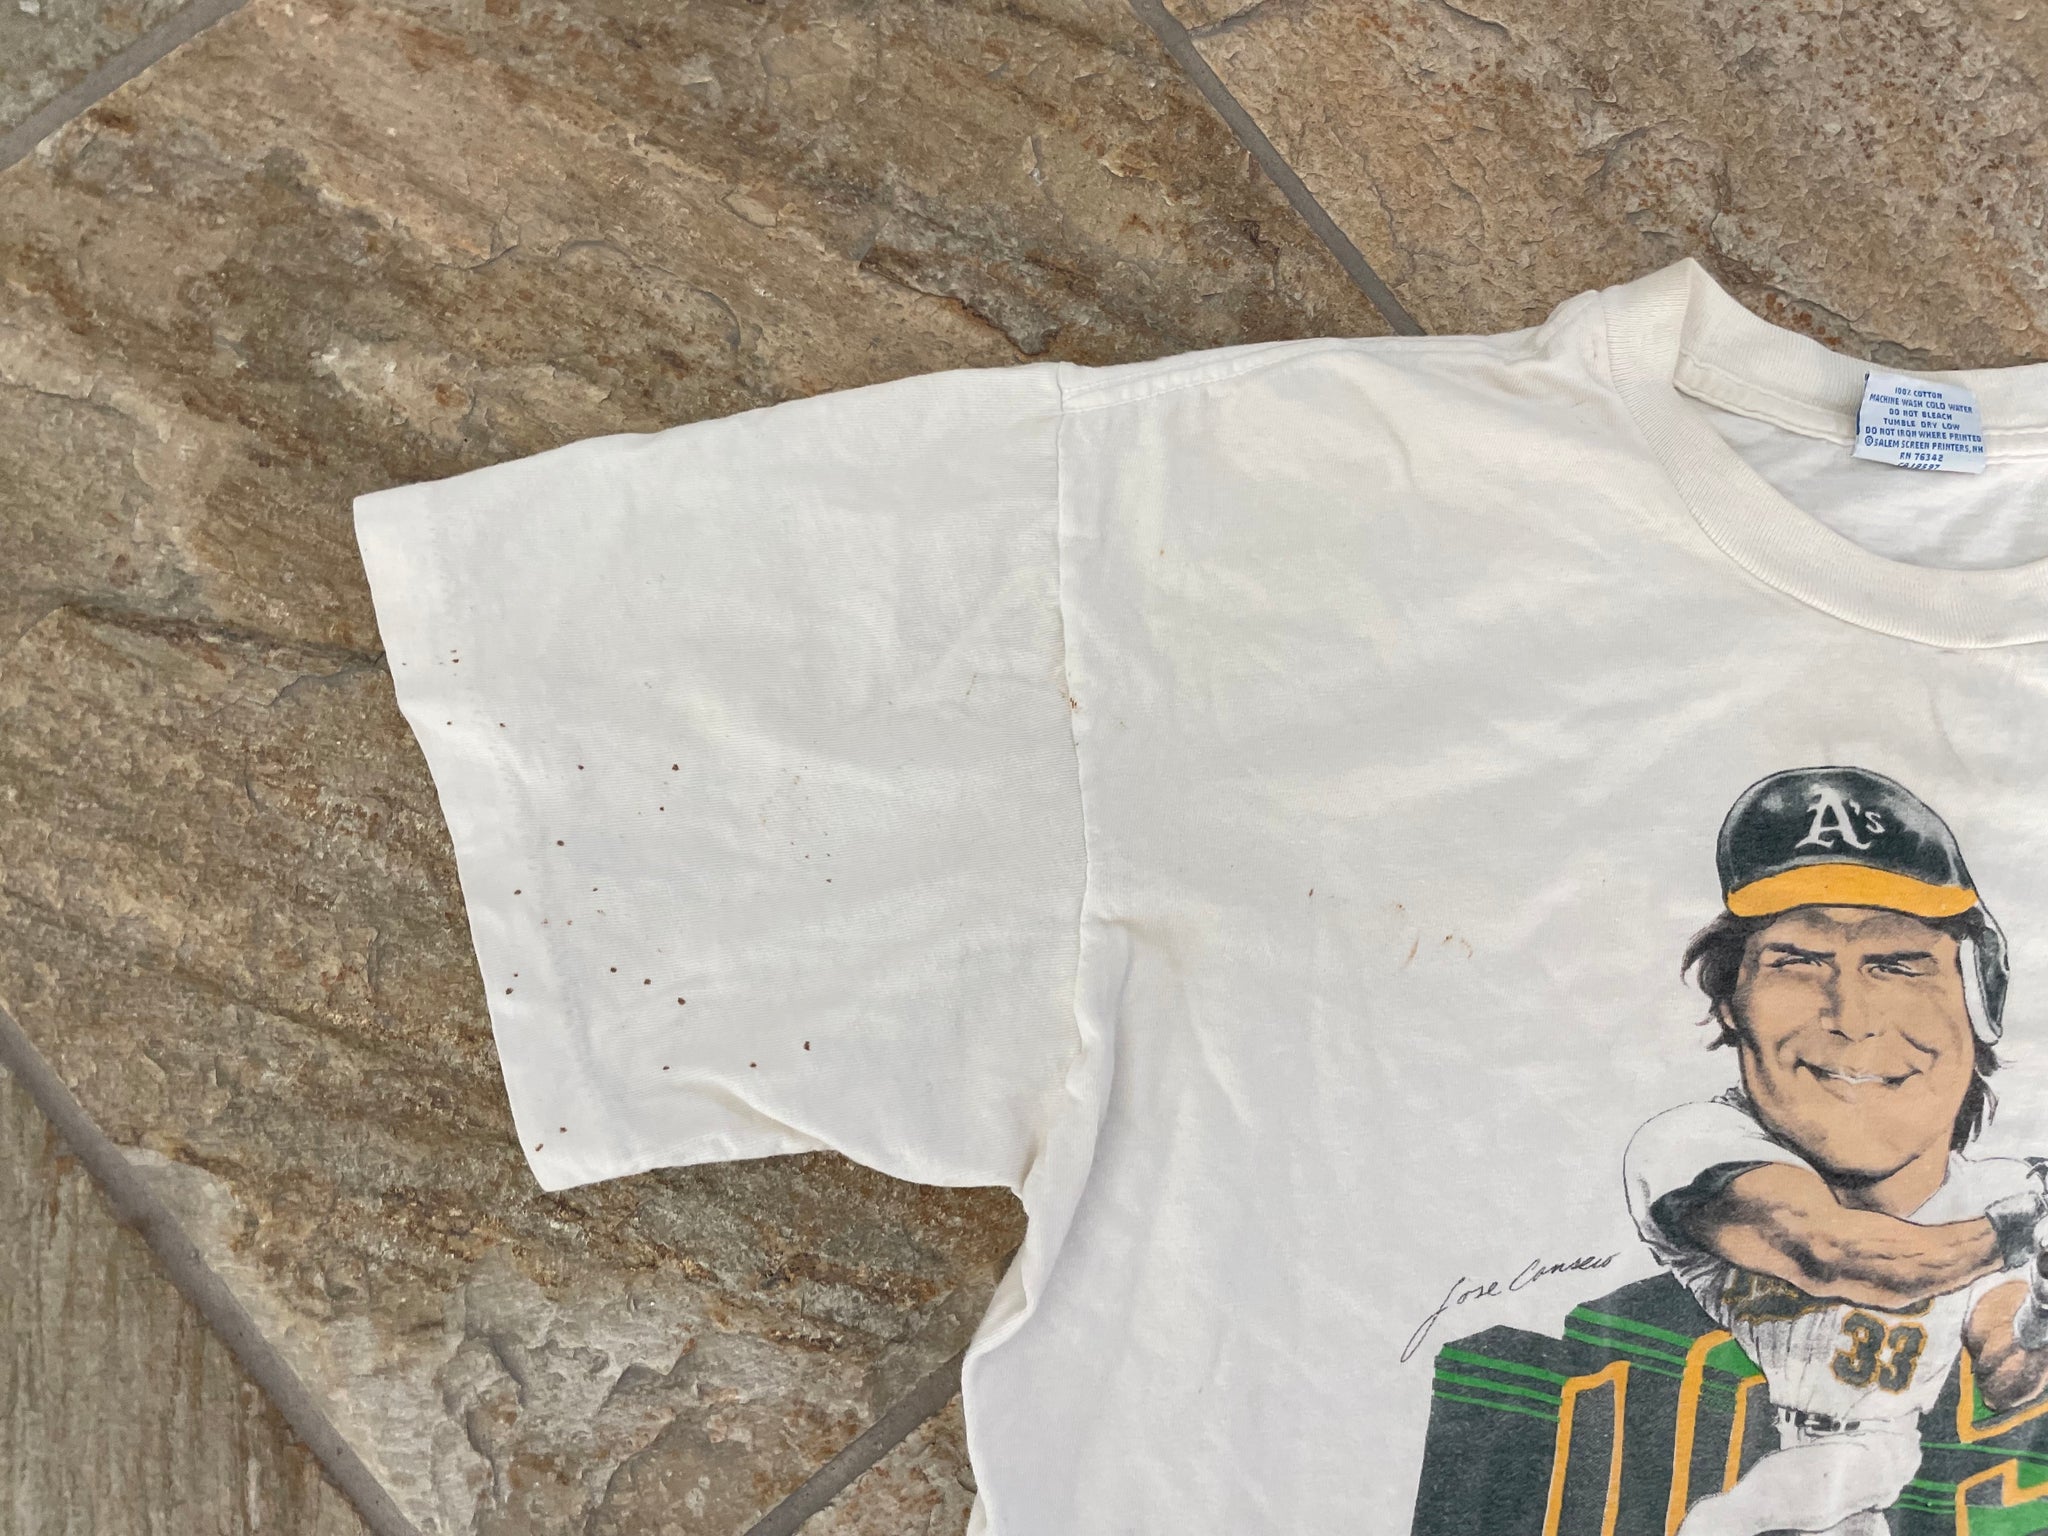 Jose Canseco Signed Oakland A's Green Throwback Majestic